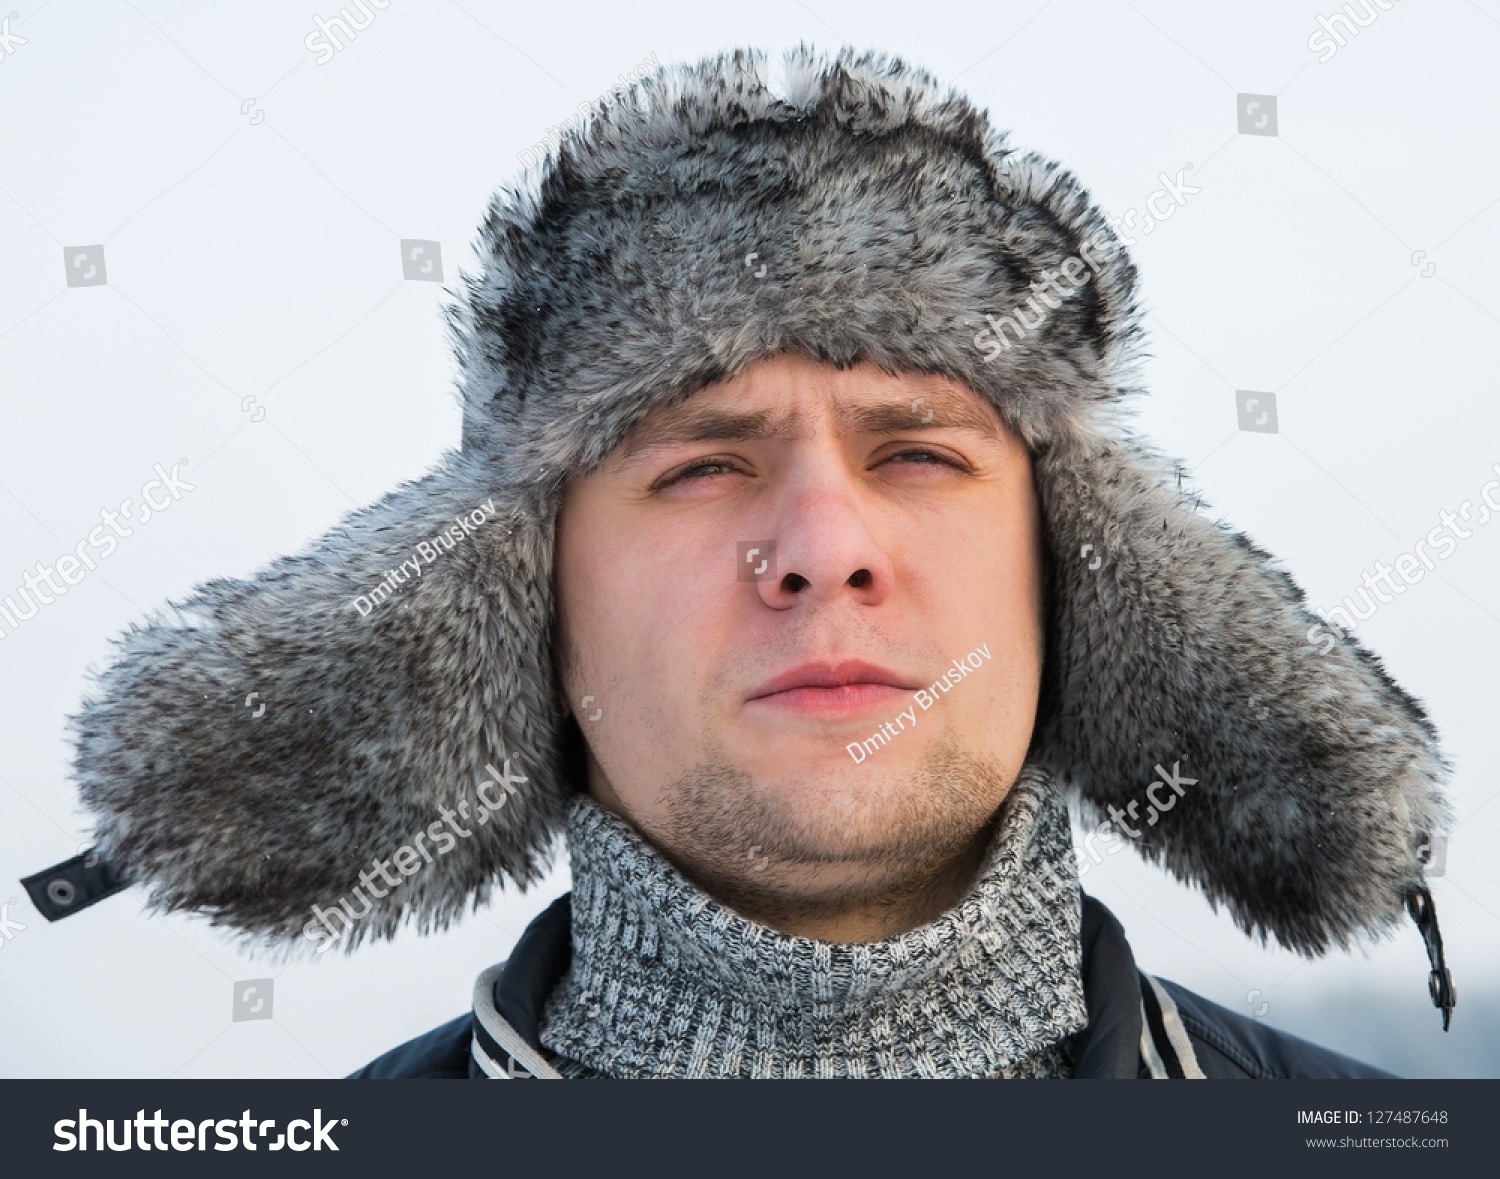 A Man In A Fur Winter Hat With Ear Flaps Stock Photo 127487648 ...